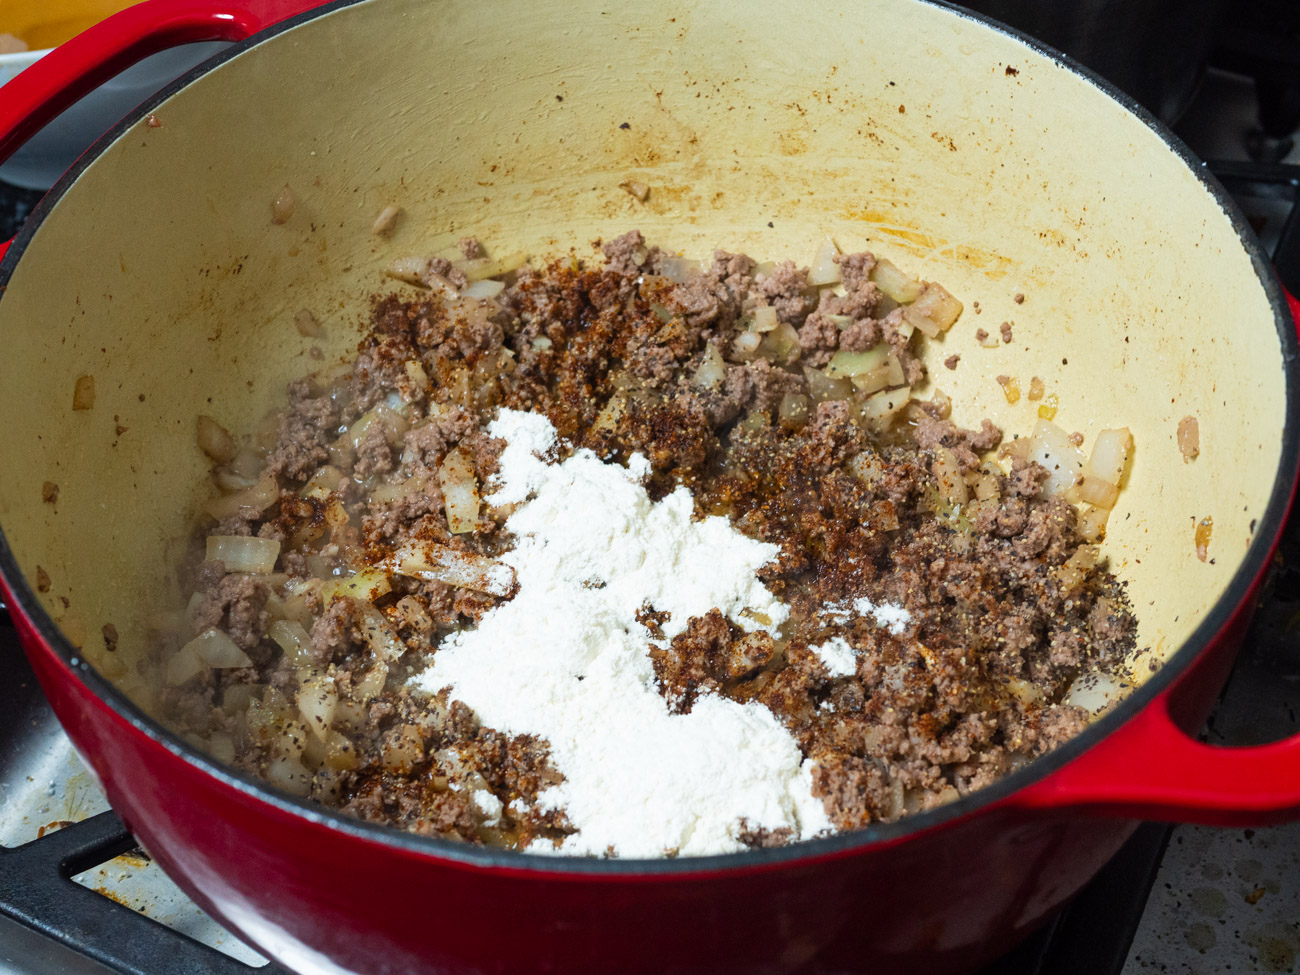 Season with salt and pepper, and sprinkle flour and chili powder over beef. Stir and cook 1 minute.